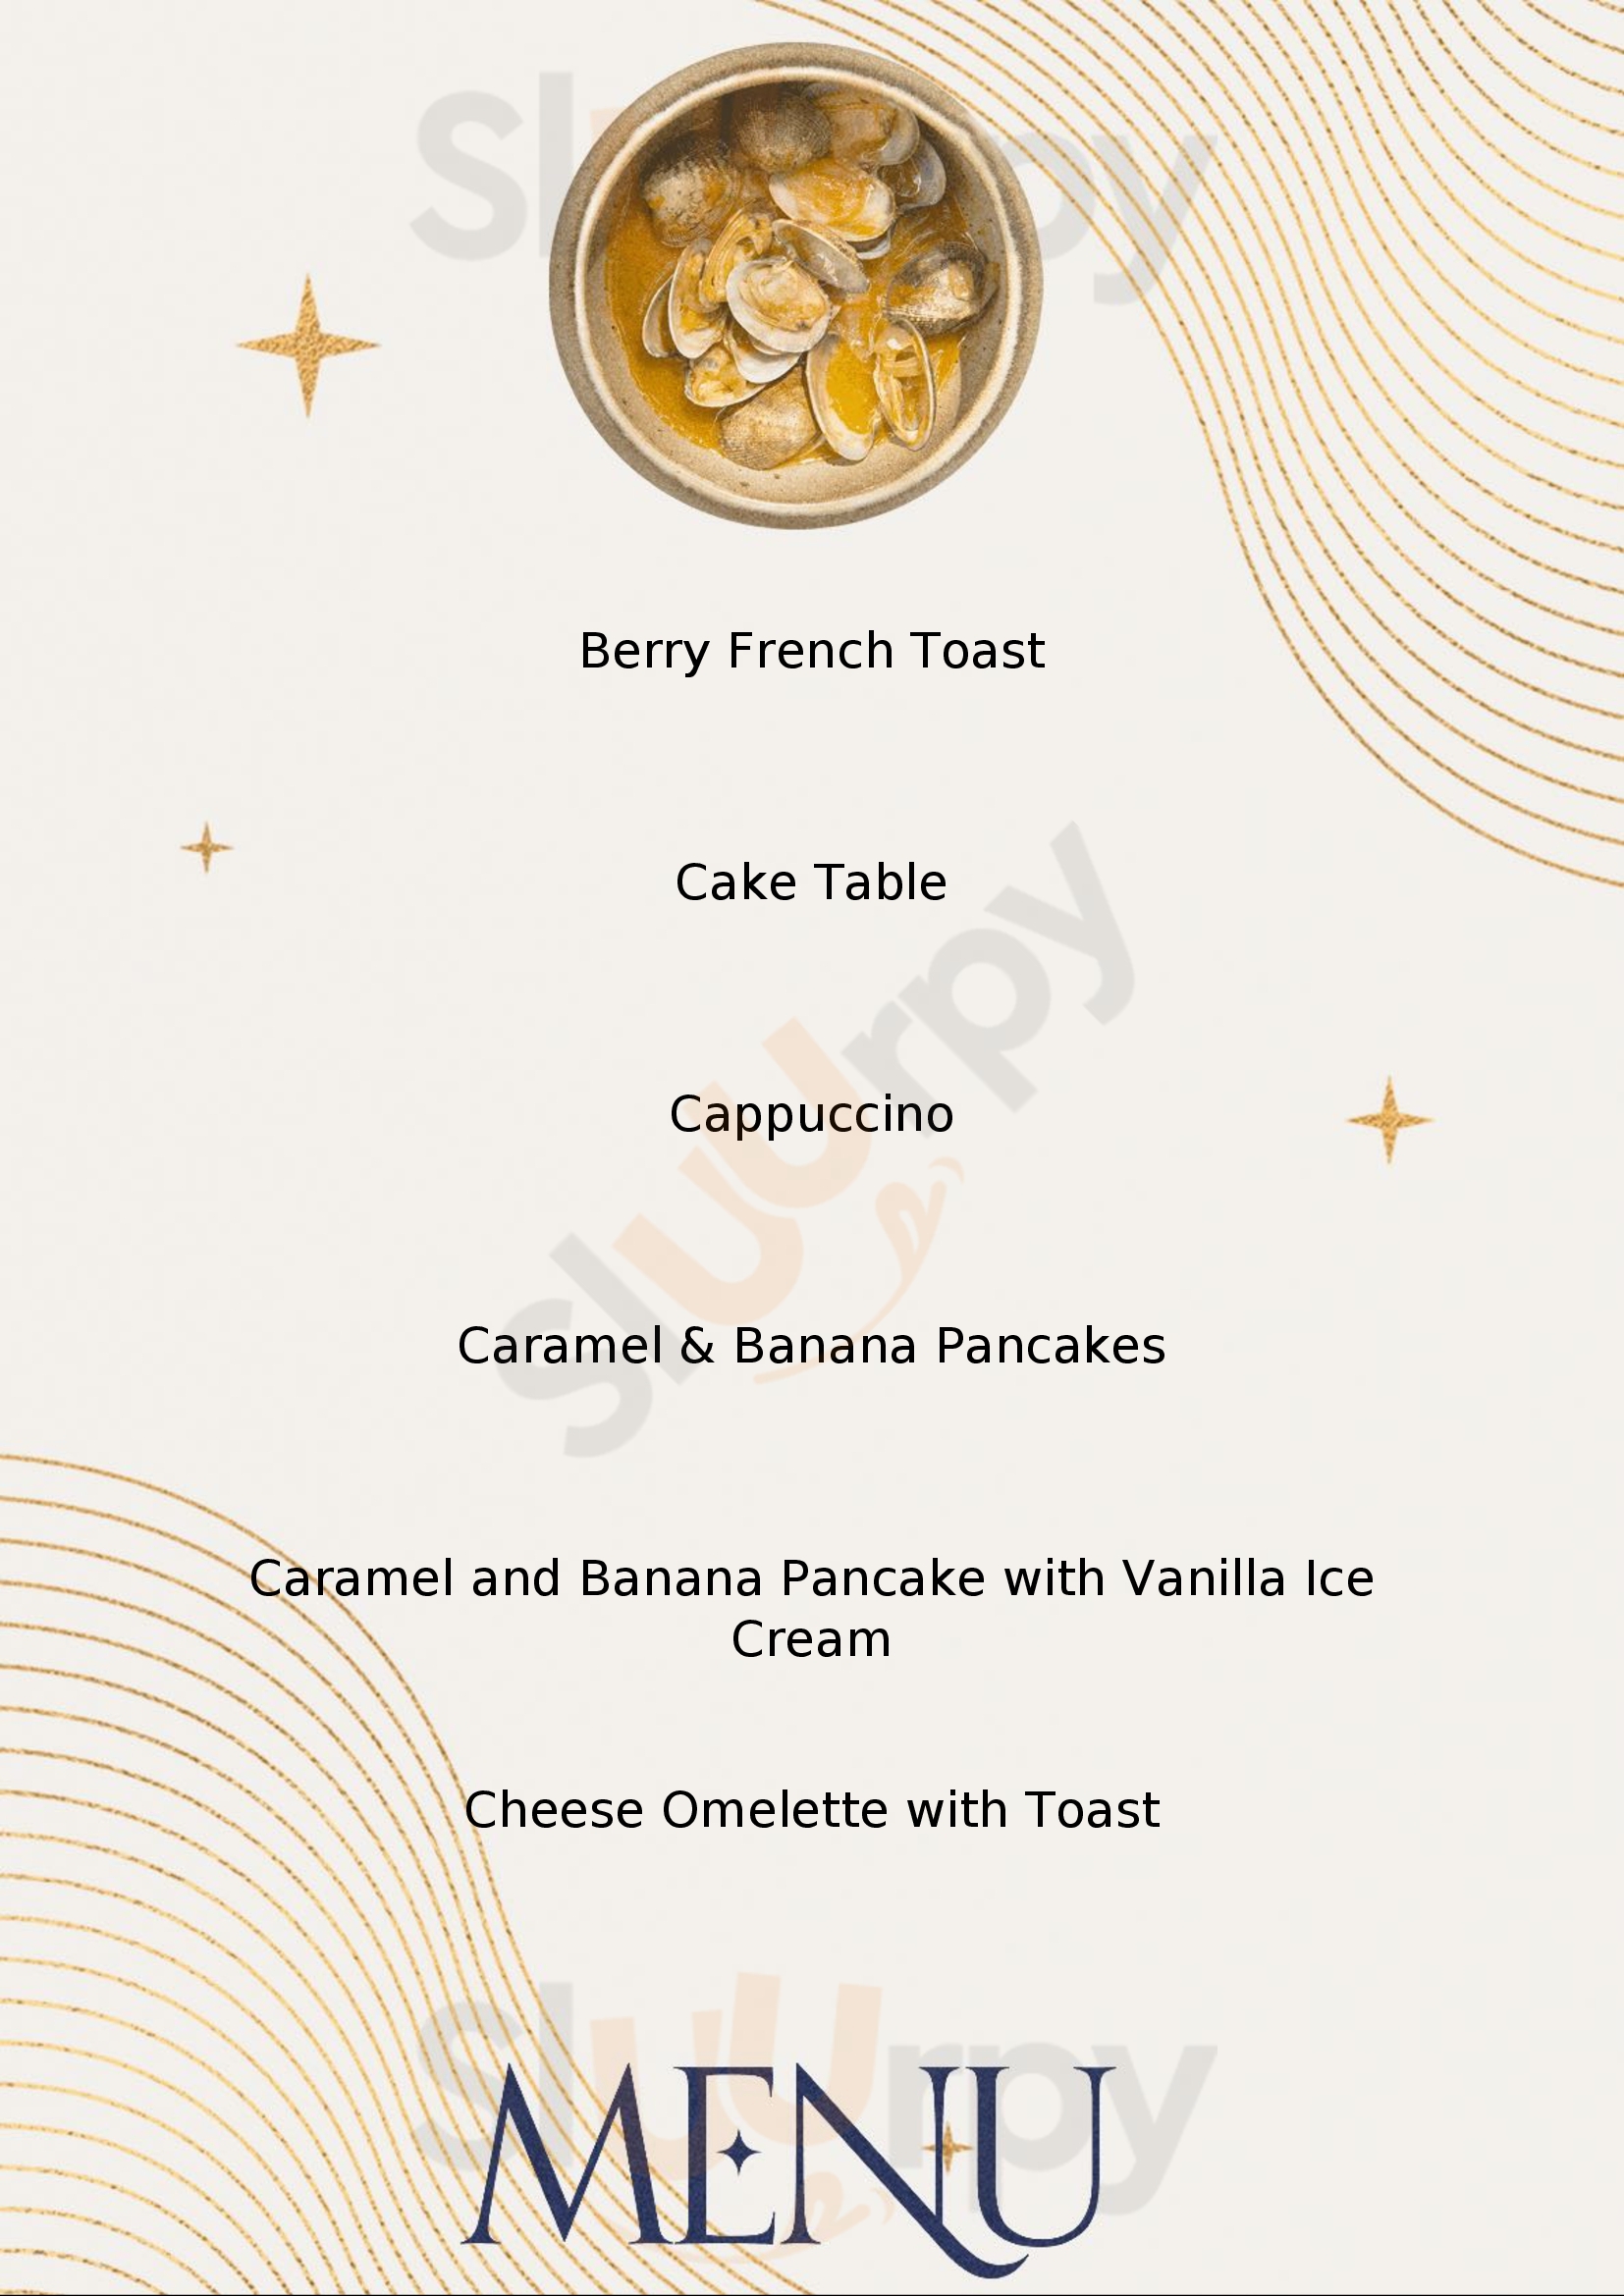 Chatters Somerset West Menu - 1